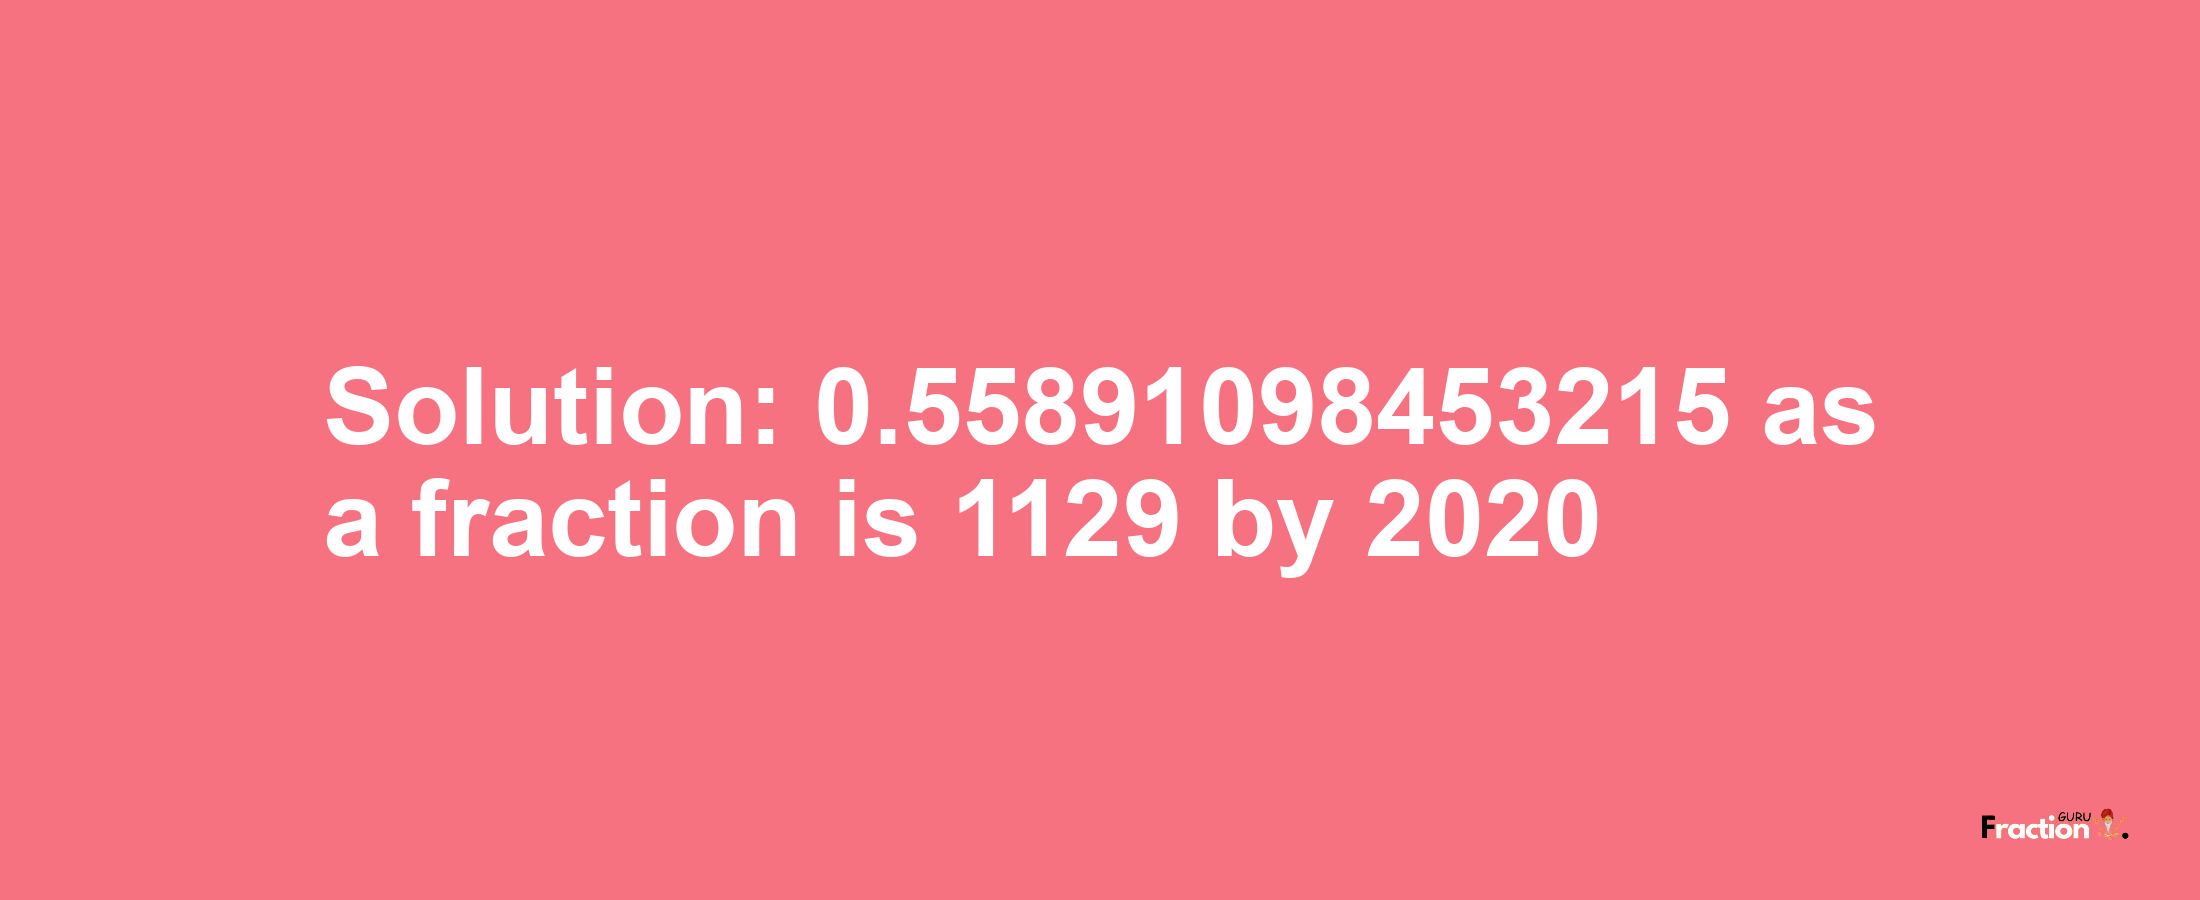 Solution:0.55891098453215 as a fraction is 1129/2020